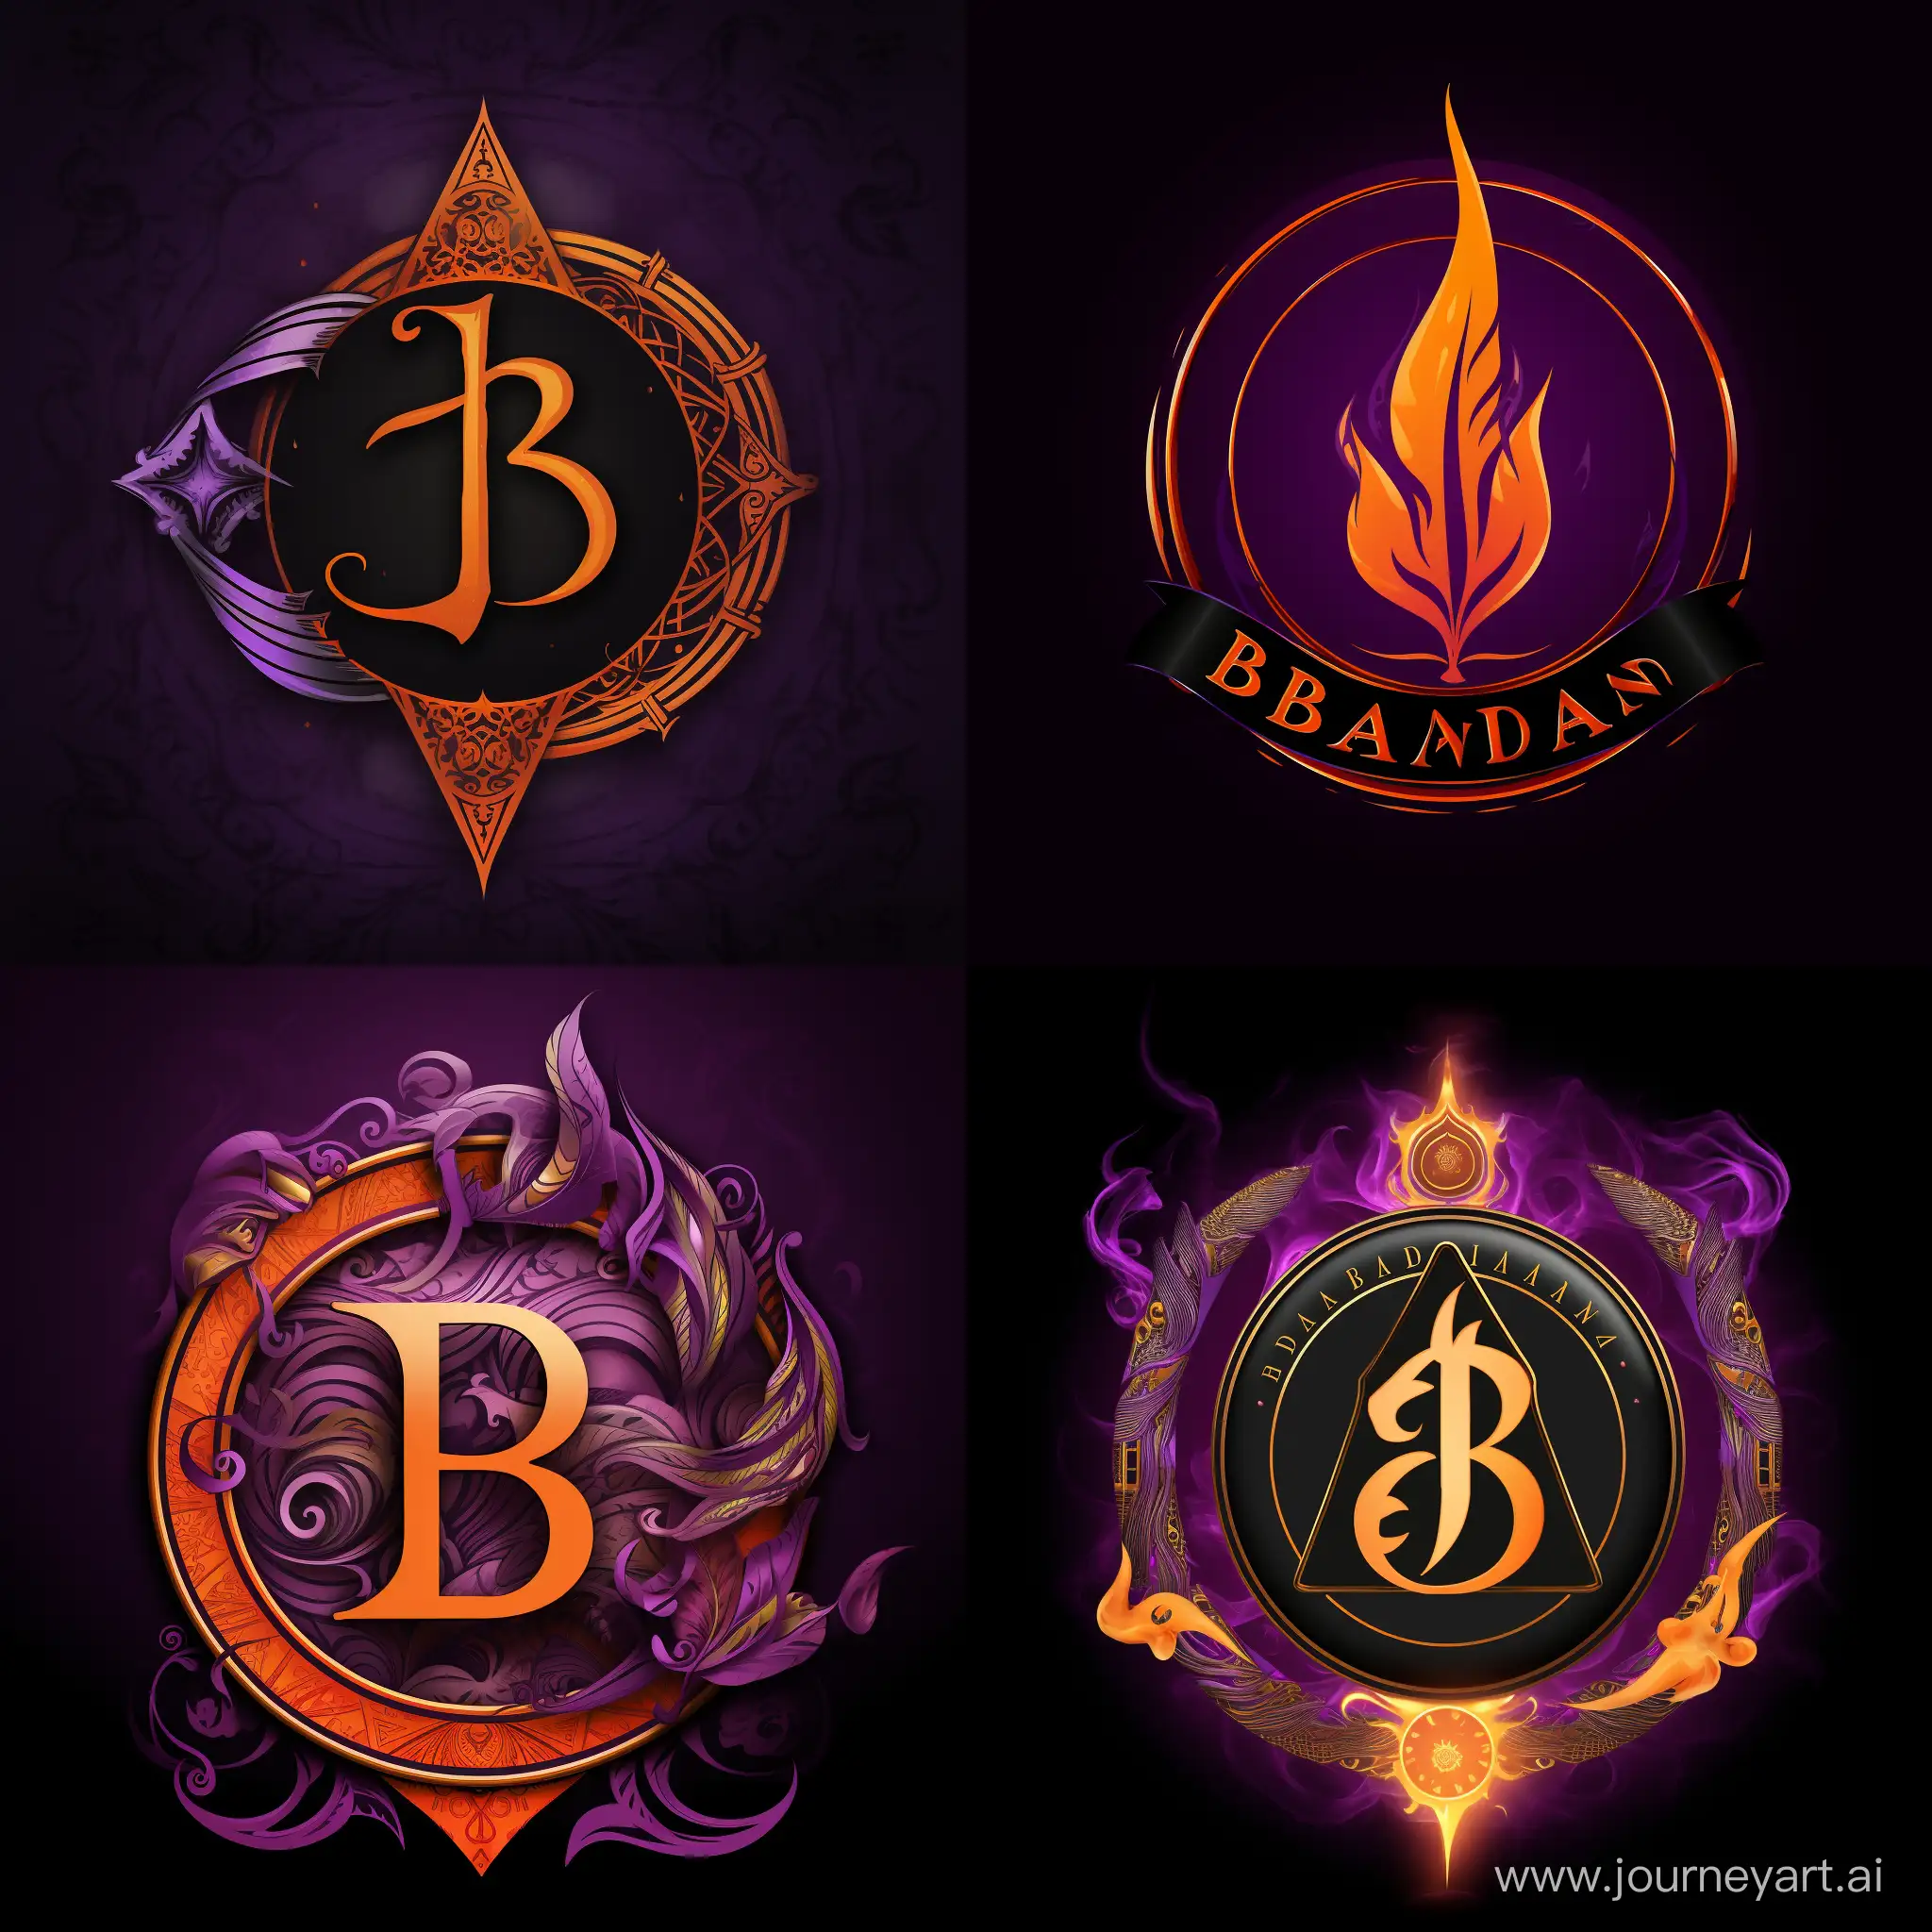 Come up with a sigil/logo for the name "Bedanga Bhandary". Include the colour purple, orange and make it appealing